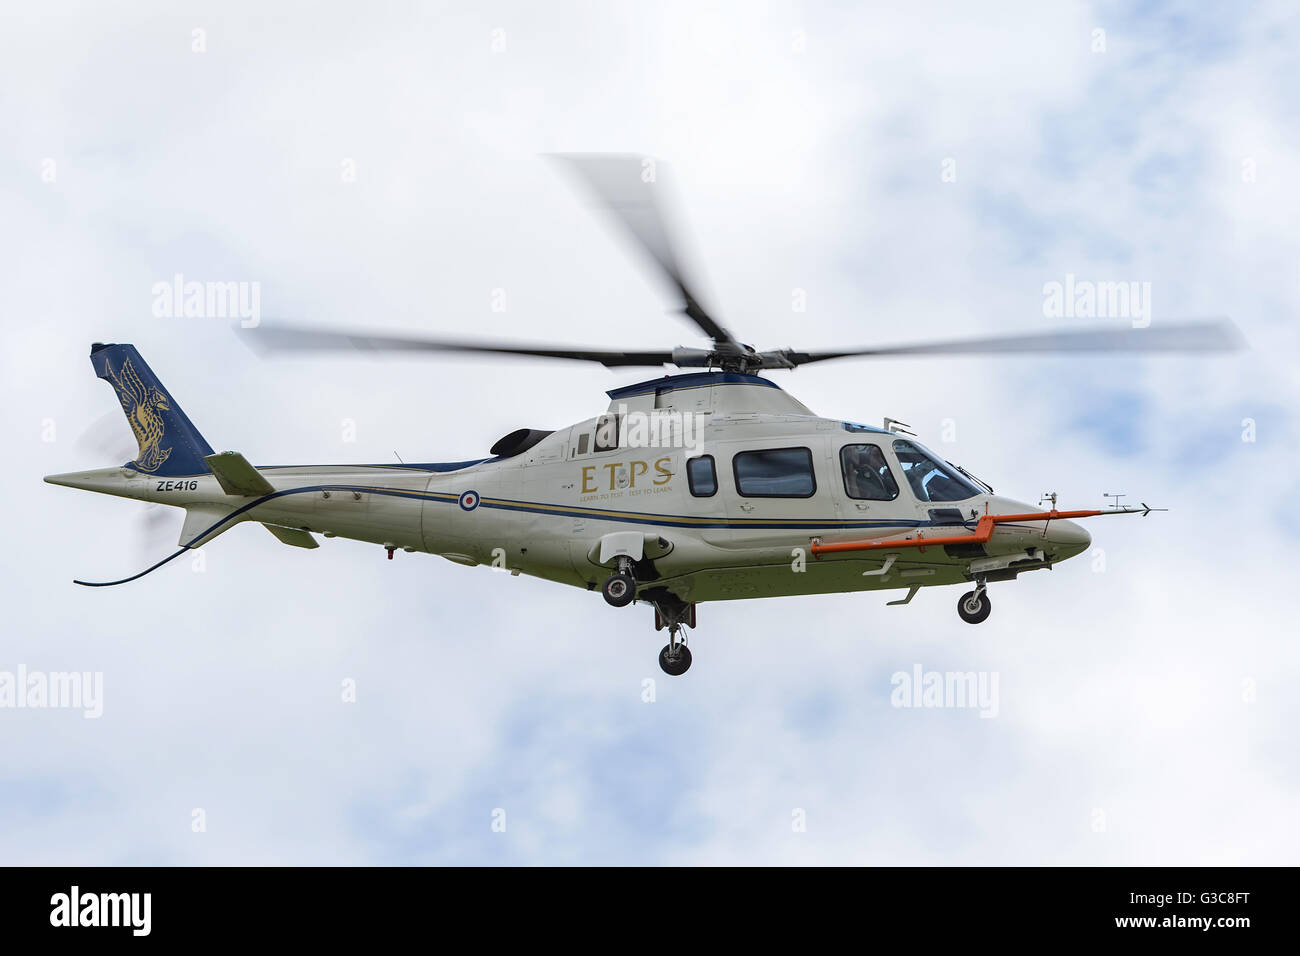 Royal Air Force (RAF) AgustaWestland AW-109E Helicopter from the Empire Test Pilots School (ETPS) Stock Photo